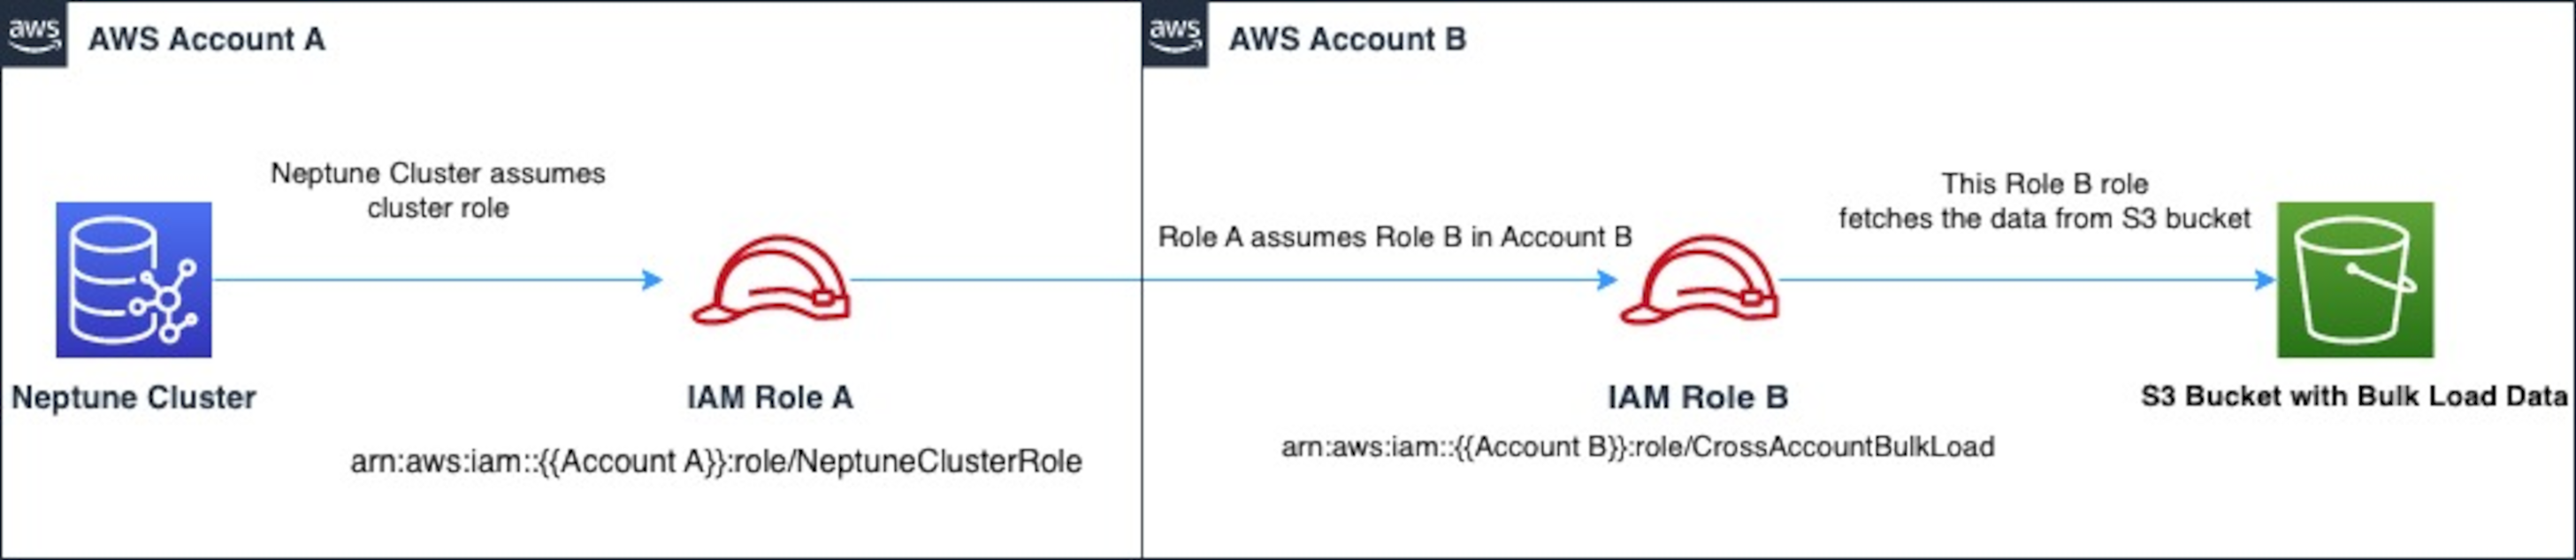 Diagram illustrating cross-account access using chained roles